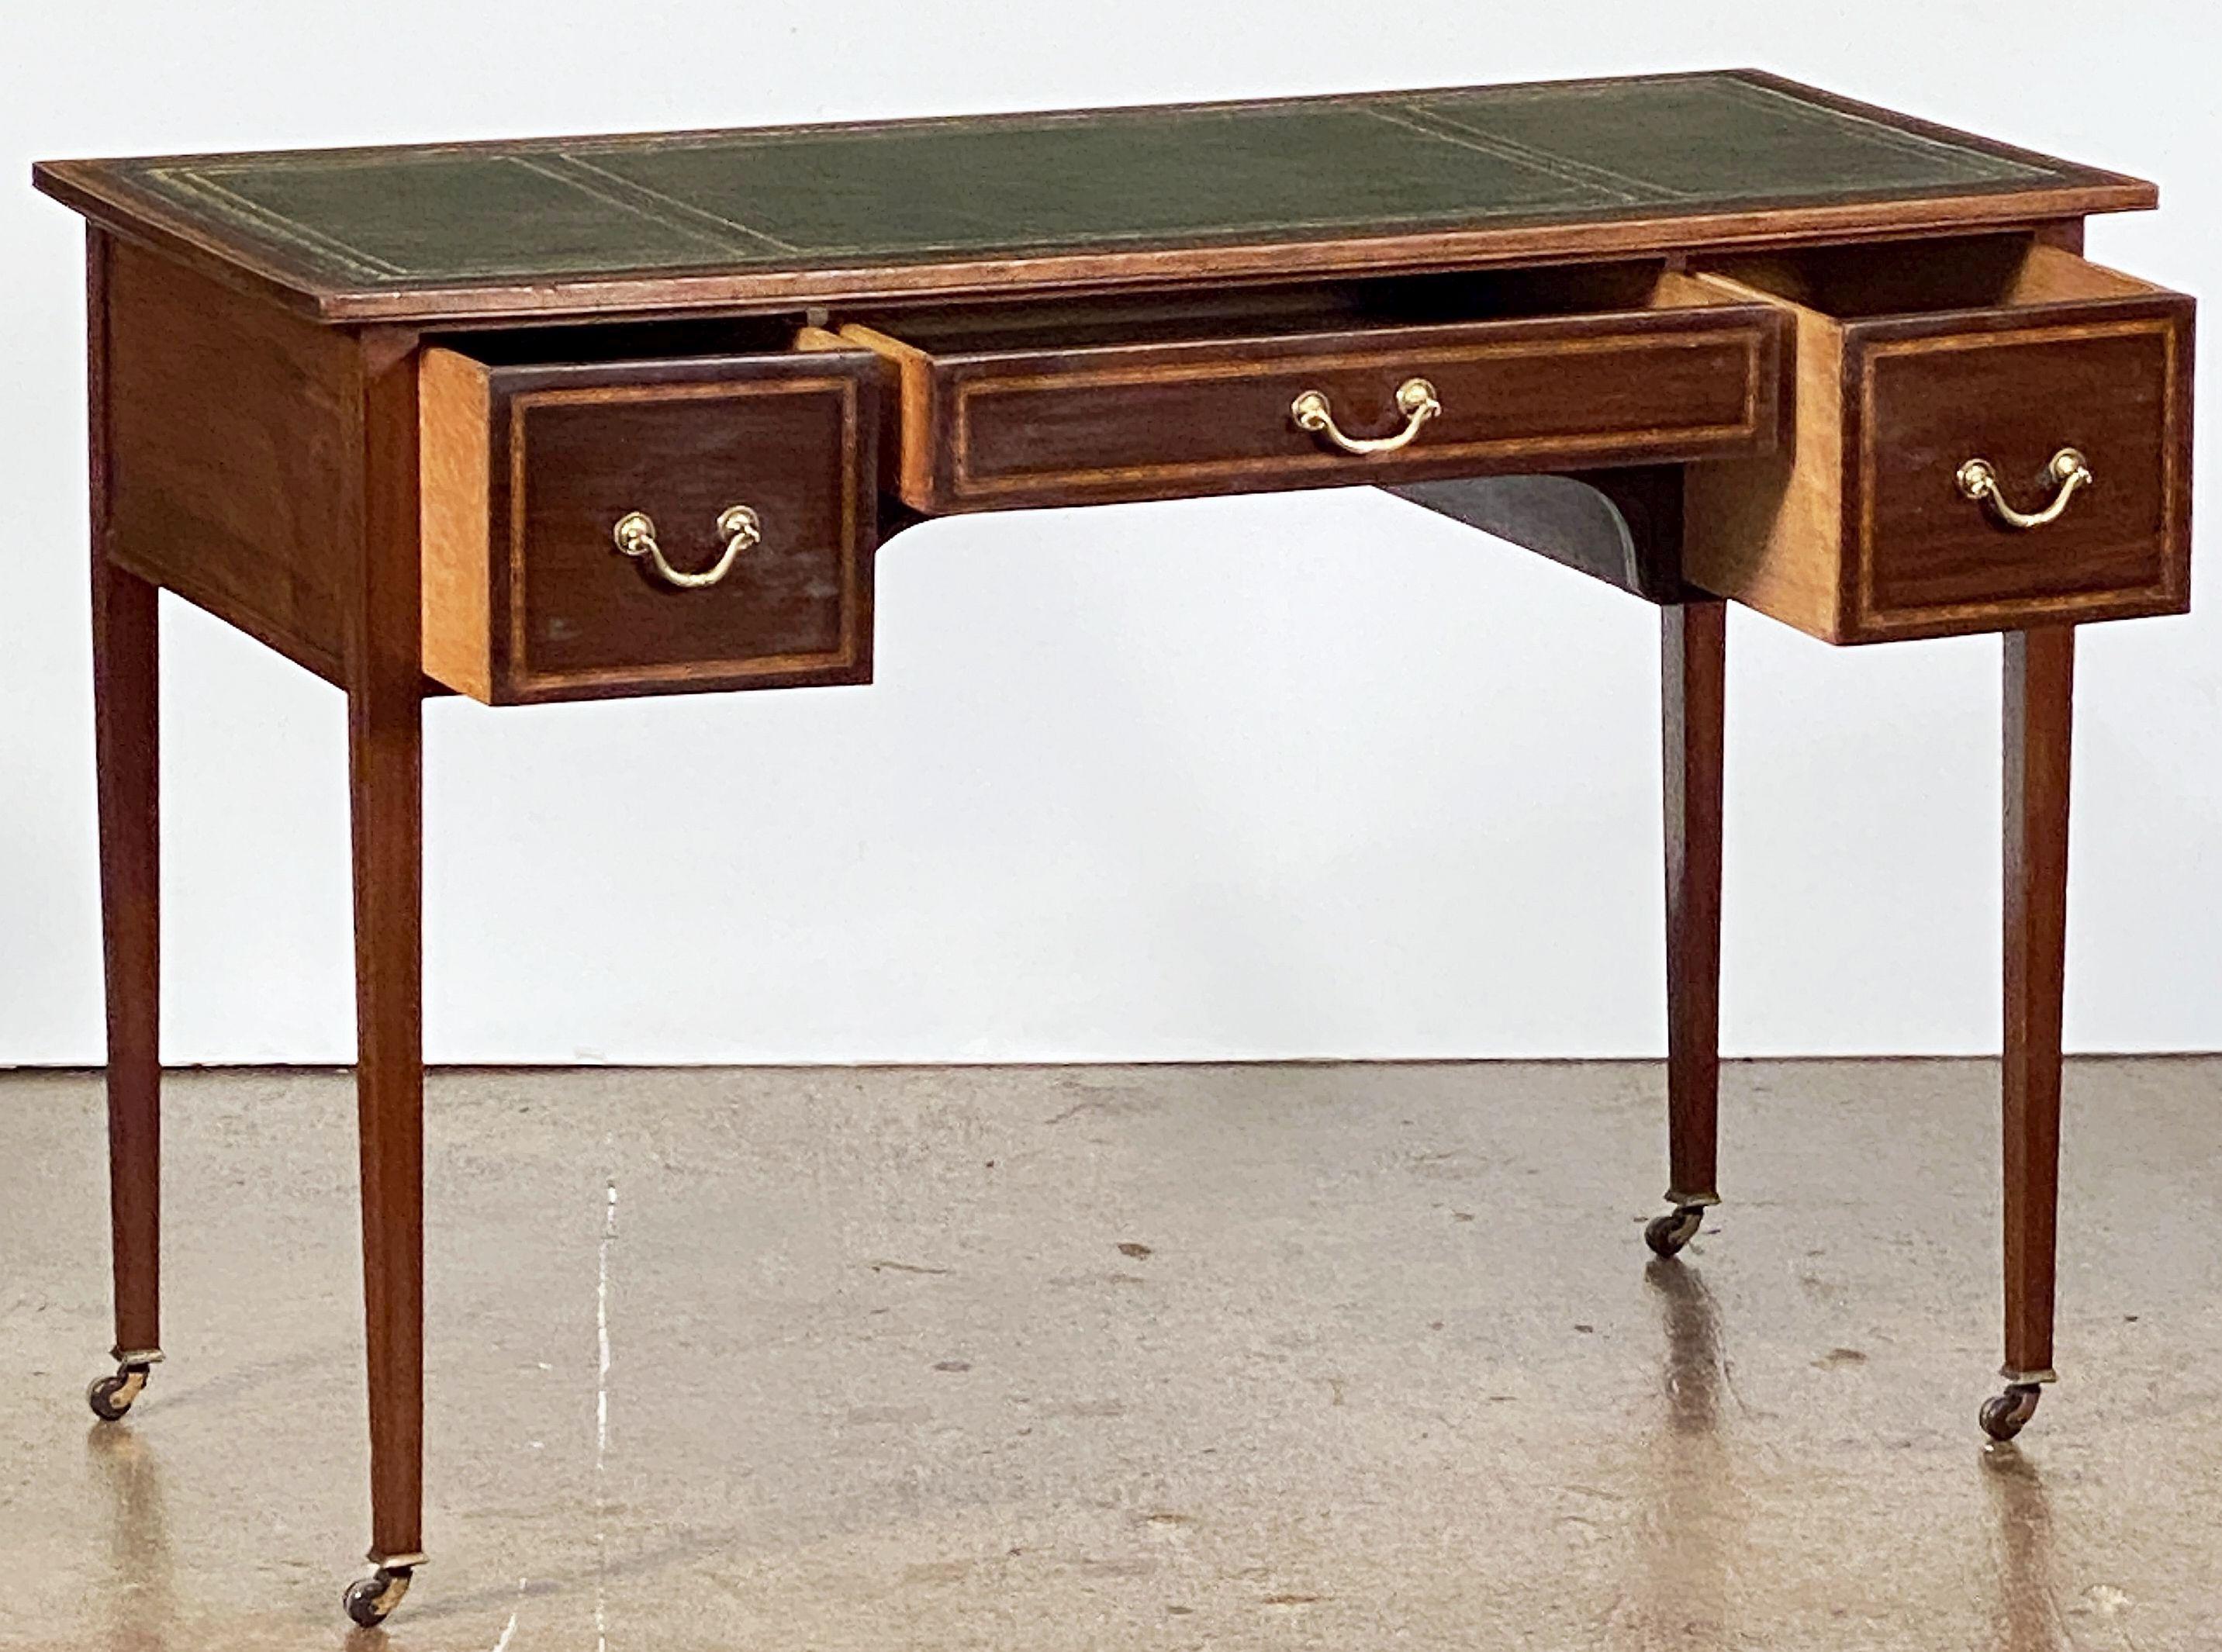 19th Century English Writing Table or Desk of Inlaid Mahogany with Embossed Leather Top